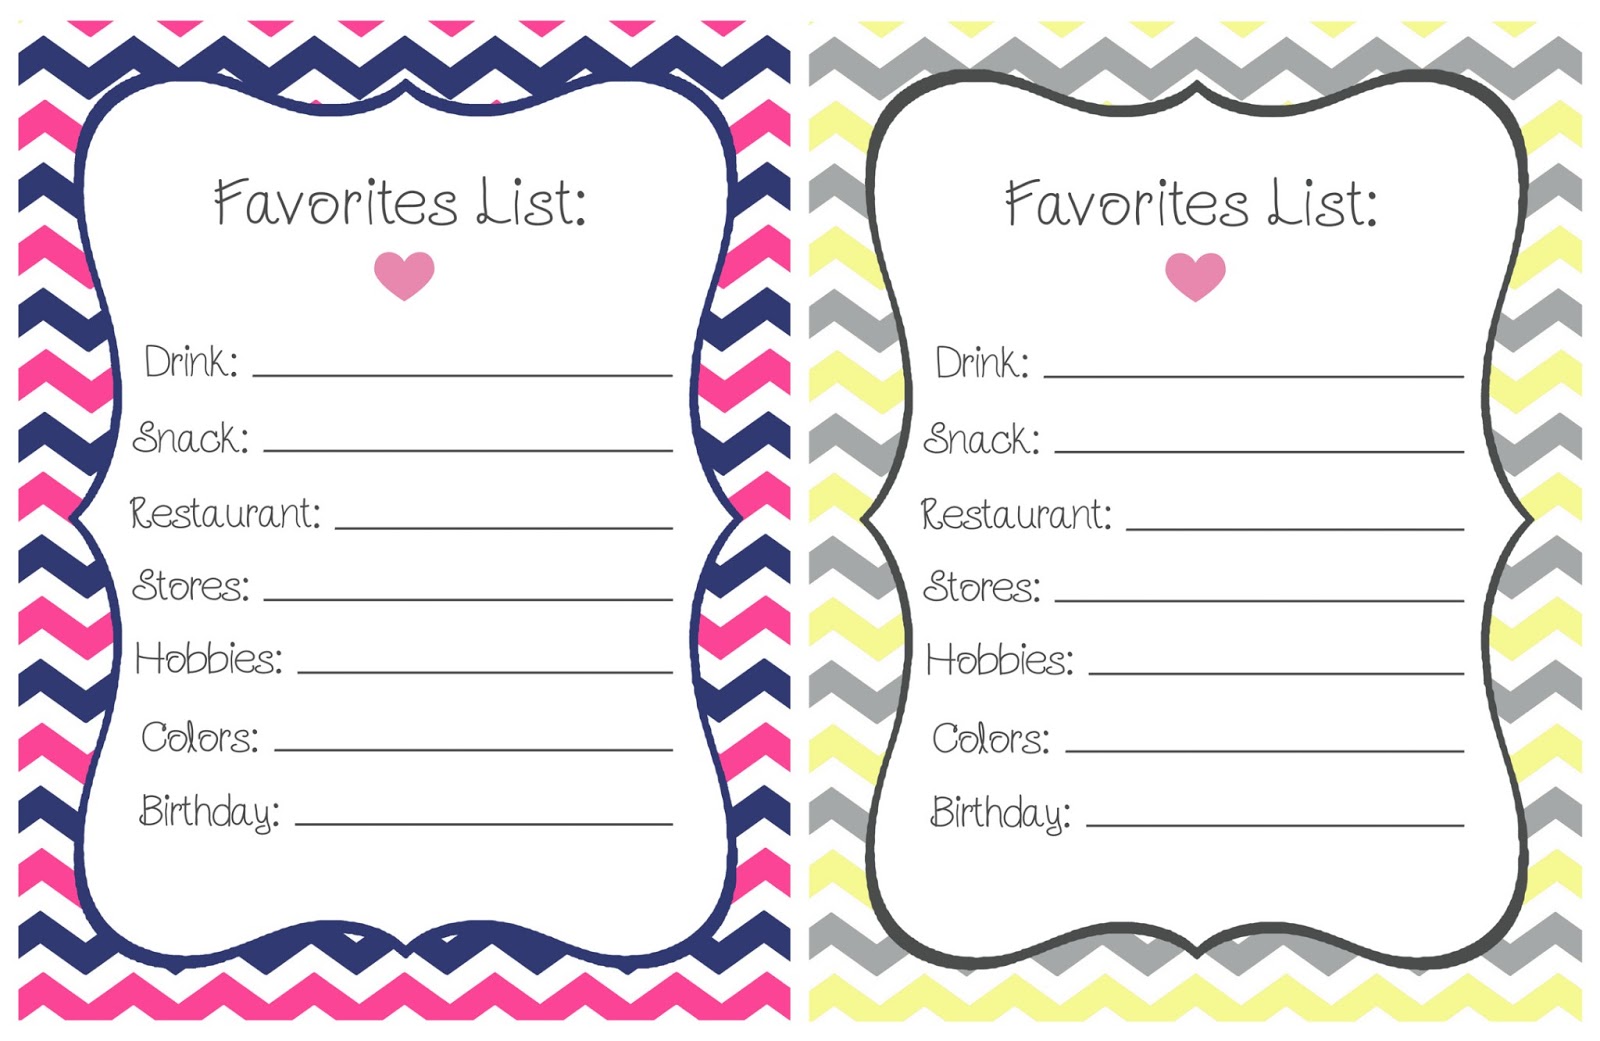 how to add to favorites list